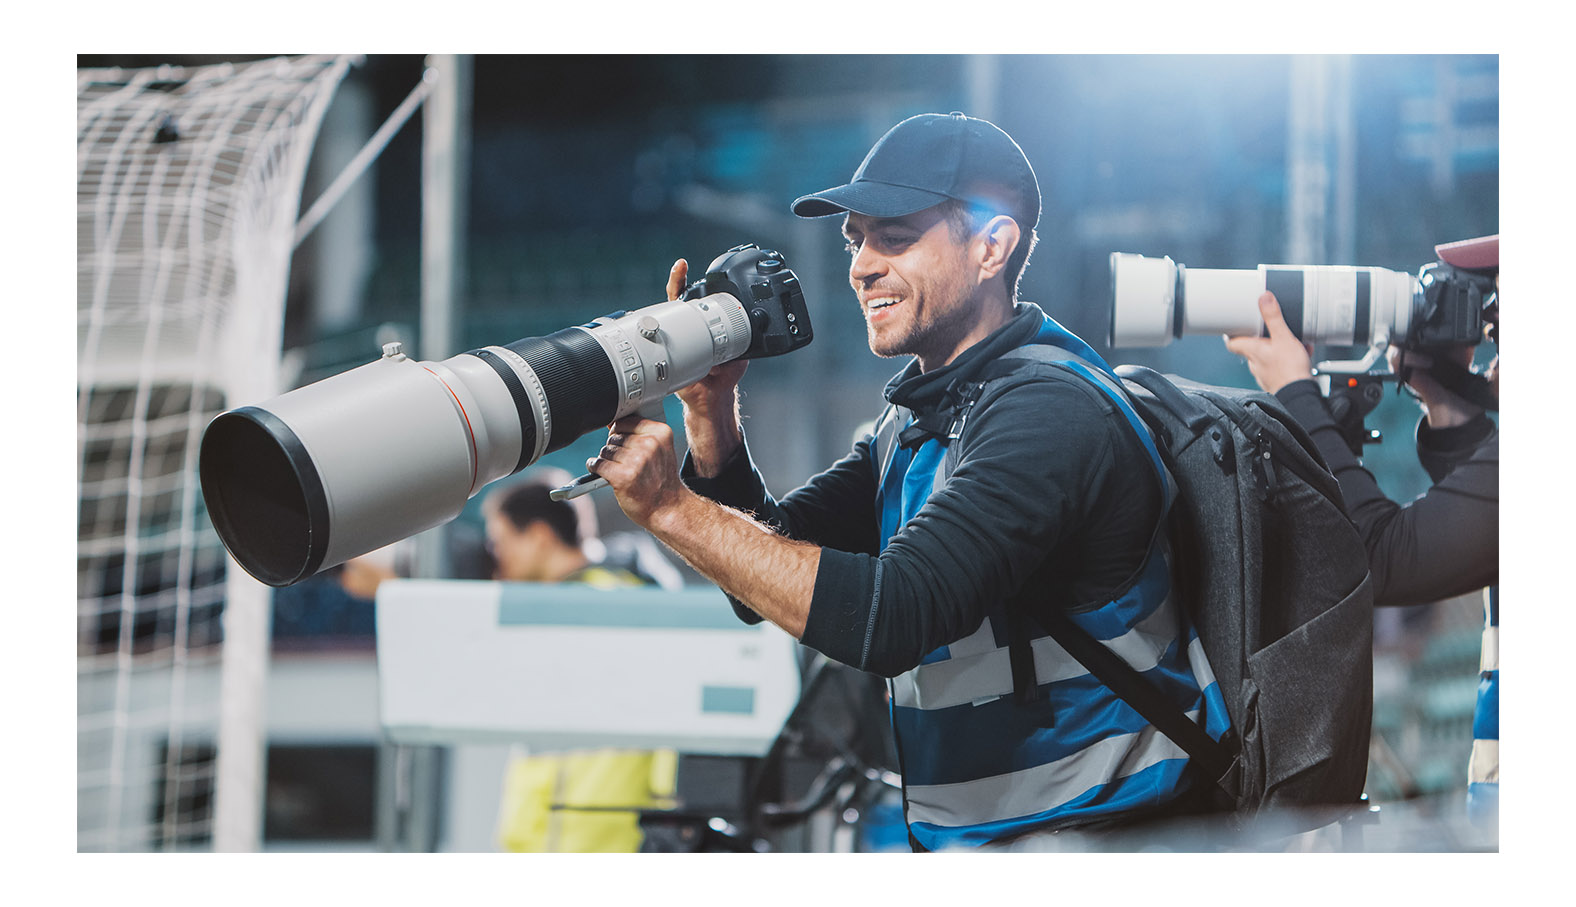 Essential gear every sports photographer needs in their arsenal